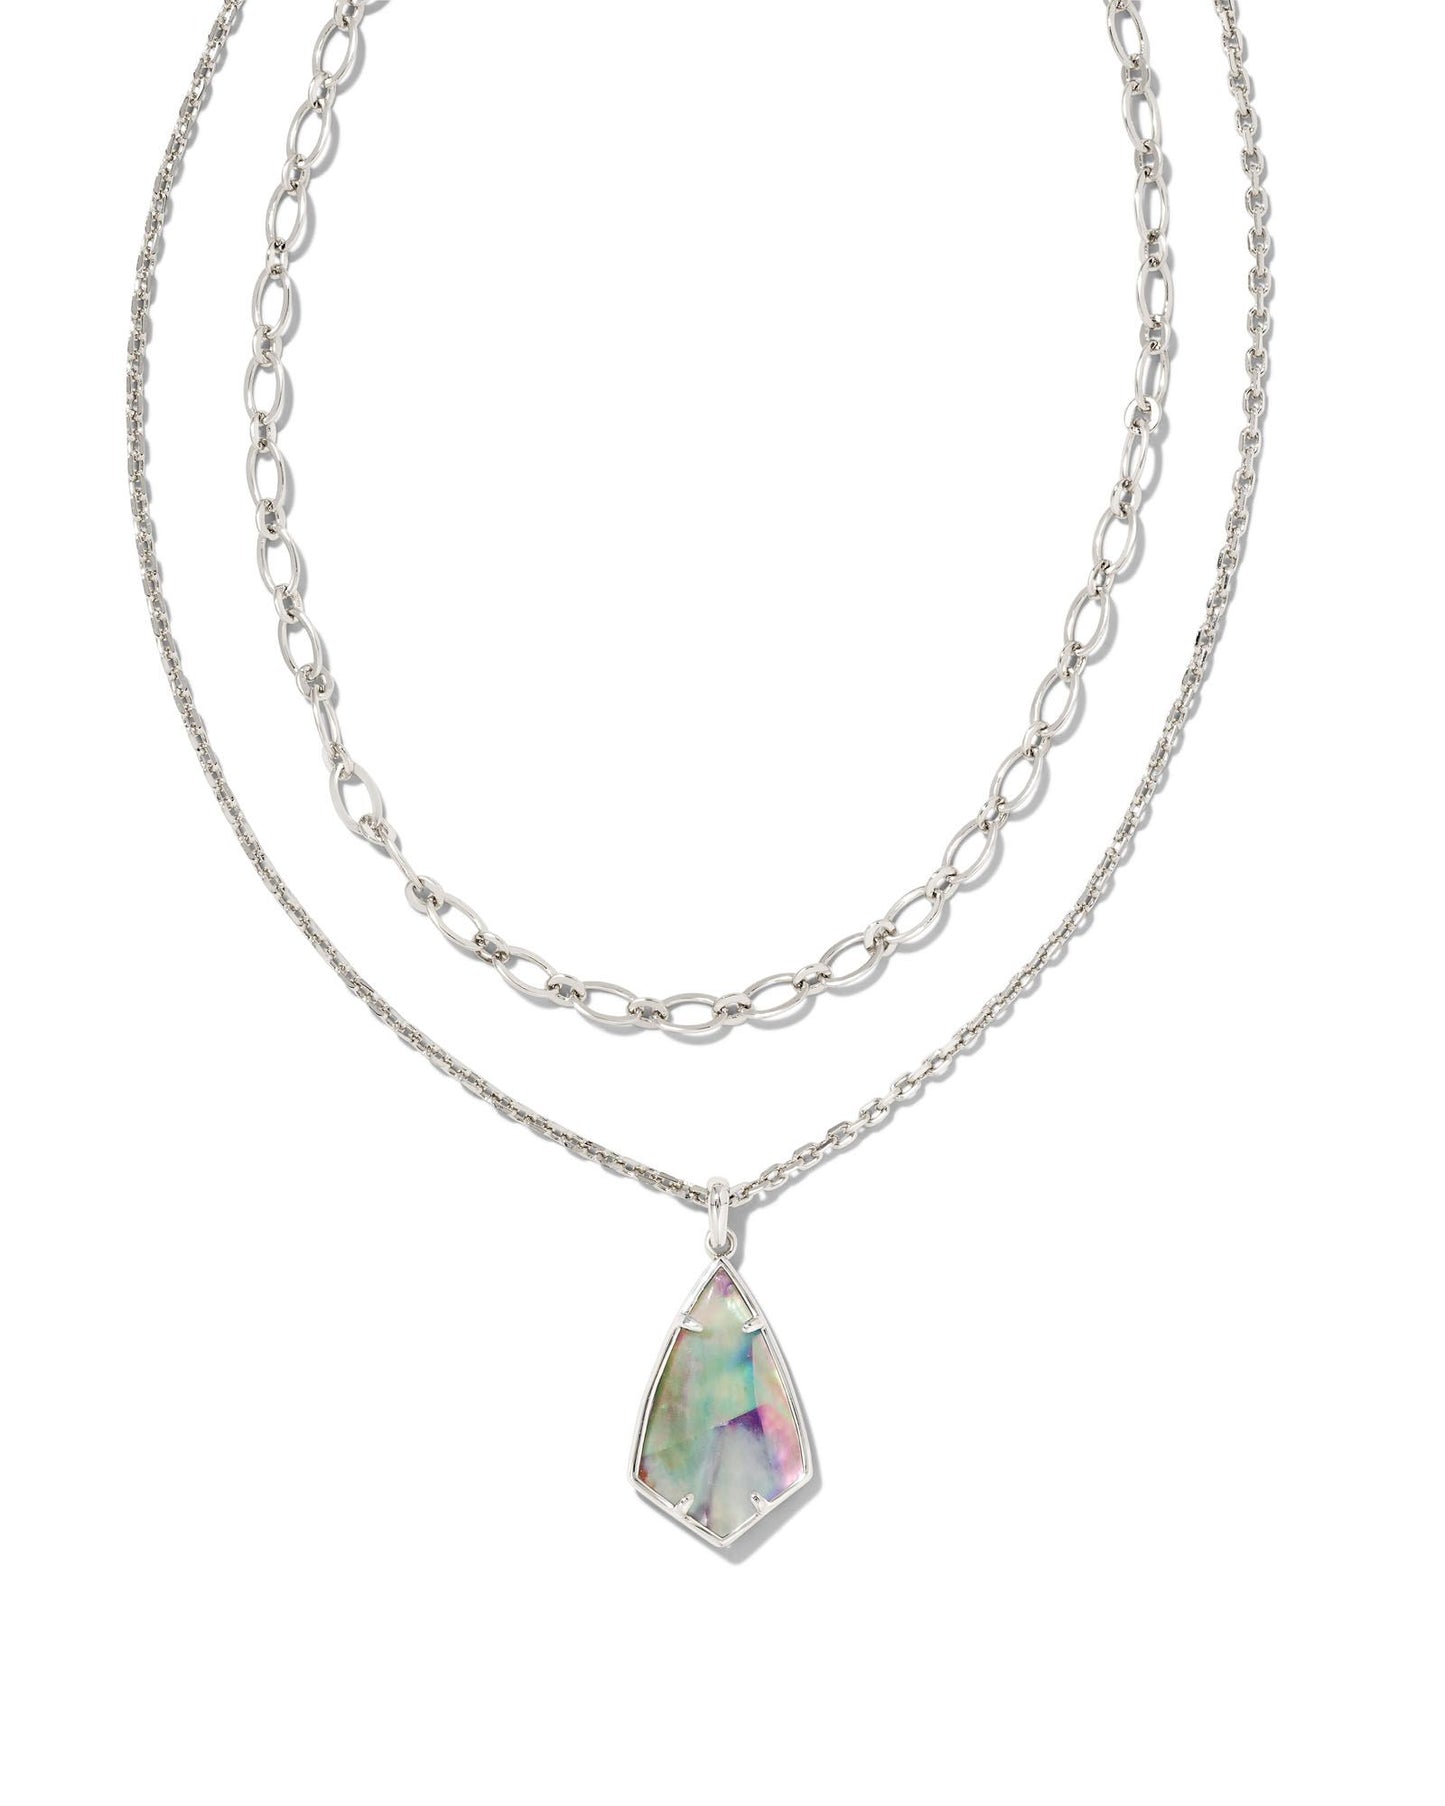 Our vintage (and much-loved!) Camry stone shape gets a modern update in the Camry Multi Strand Necklace. With two pre-layered chains and a gorgeous stone, this necklace makes staying on trend easier than ever. This metal is 24k rhodium plated over brass with an iridscent abalone stone. 